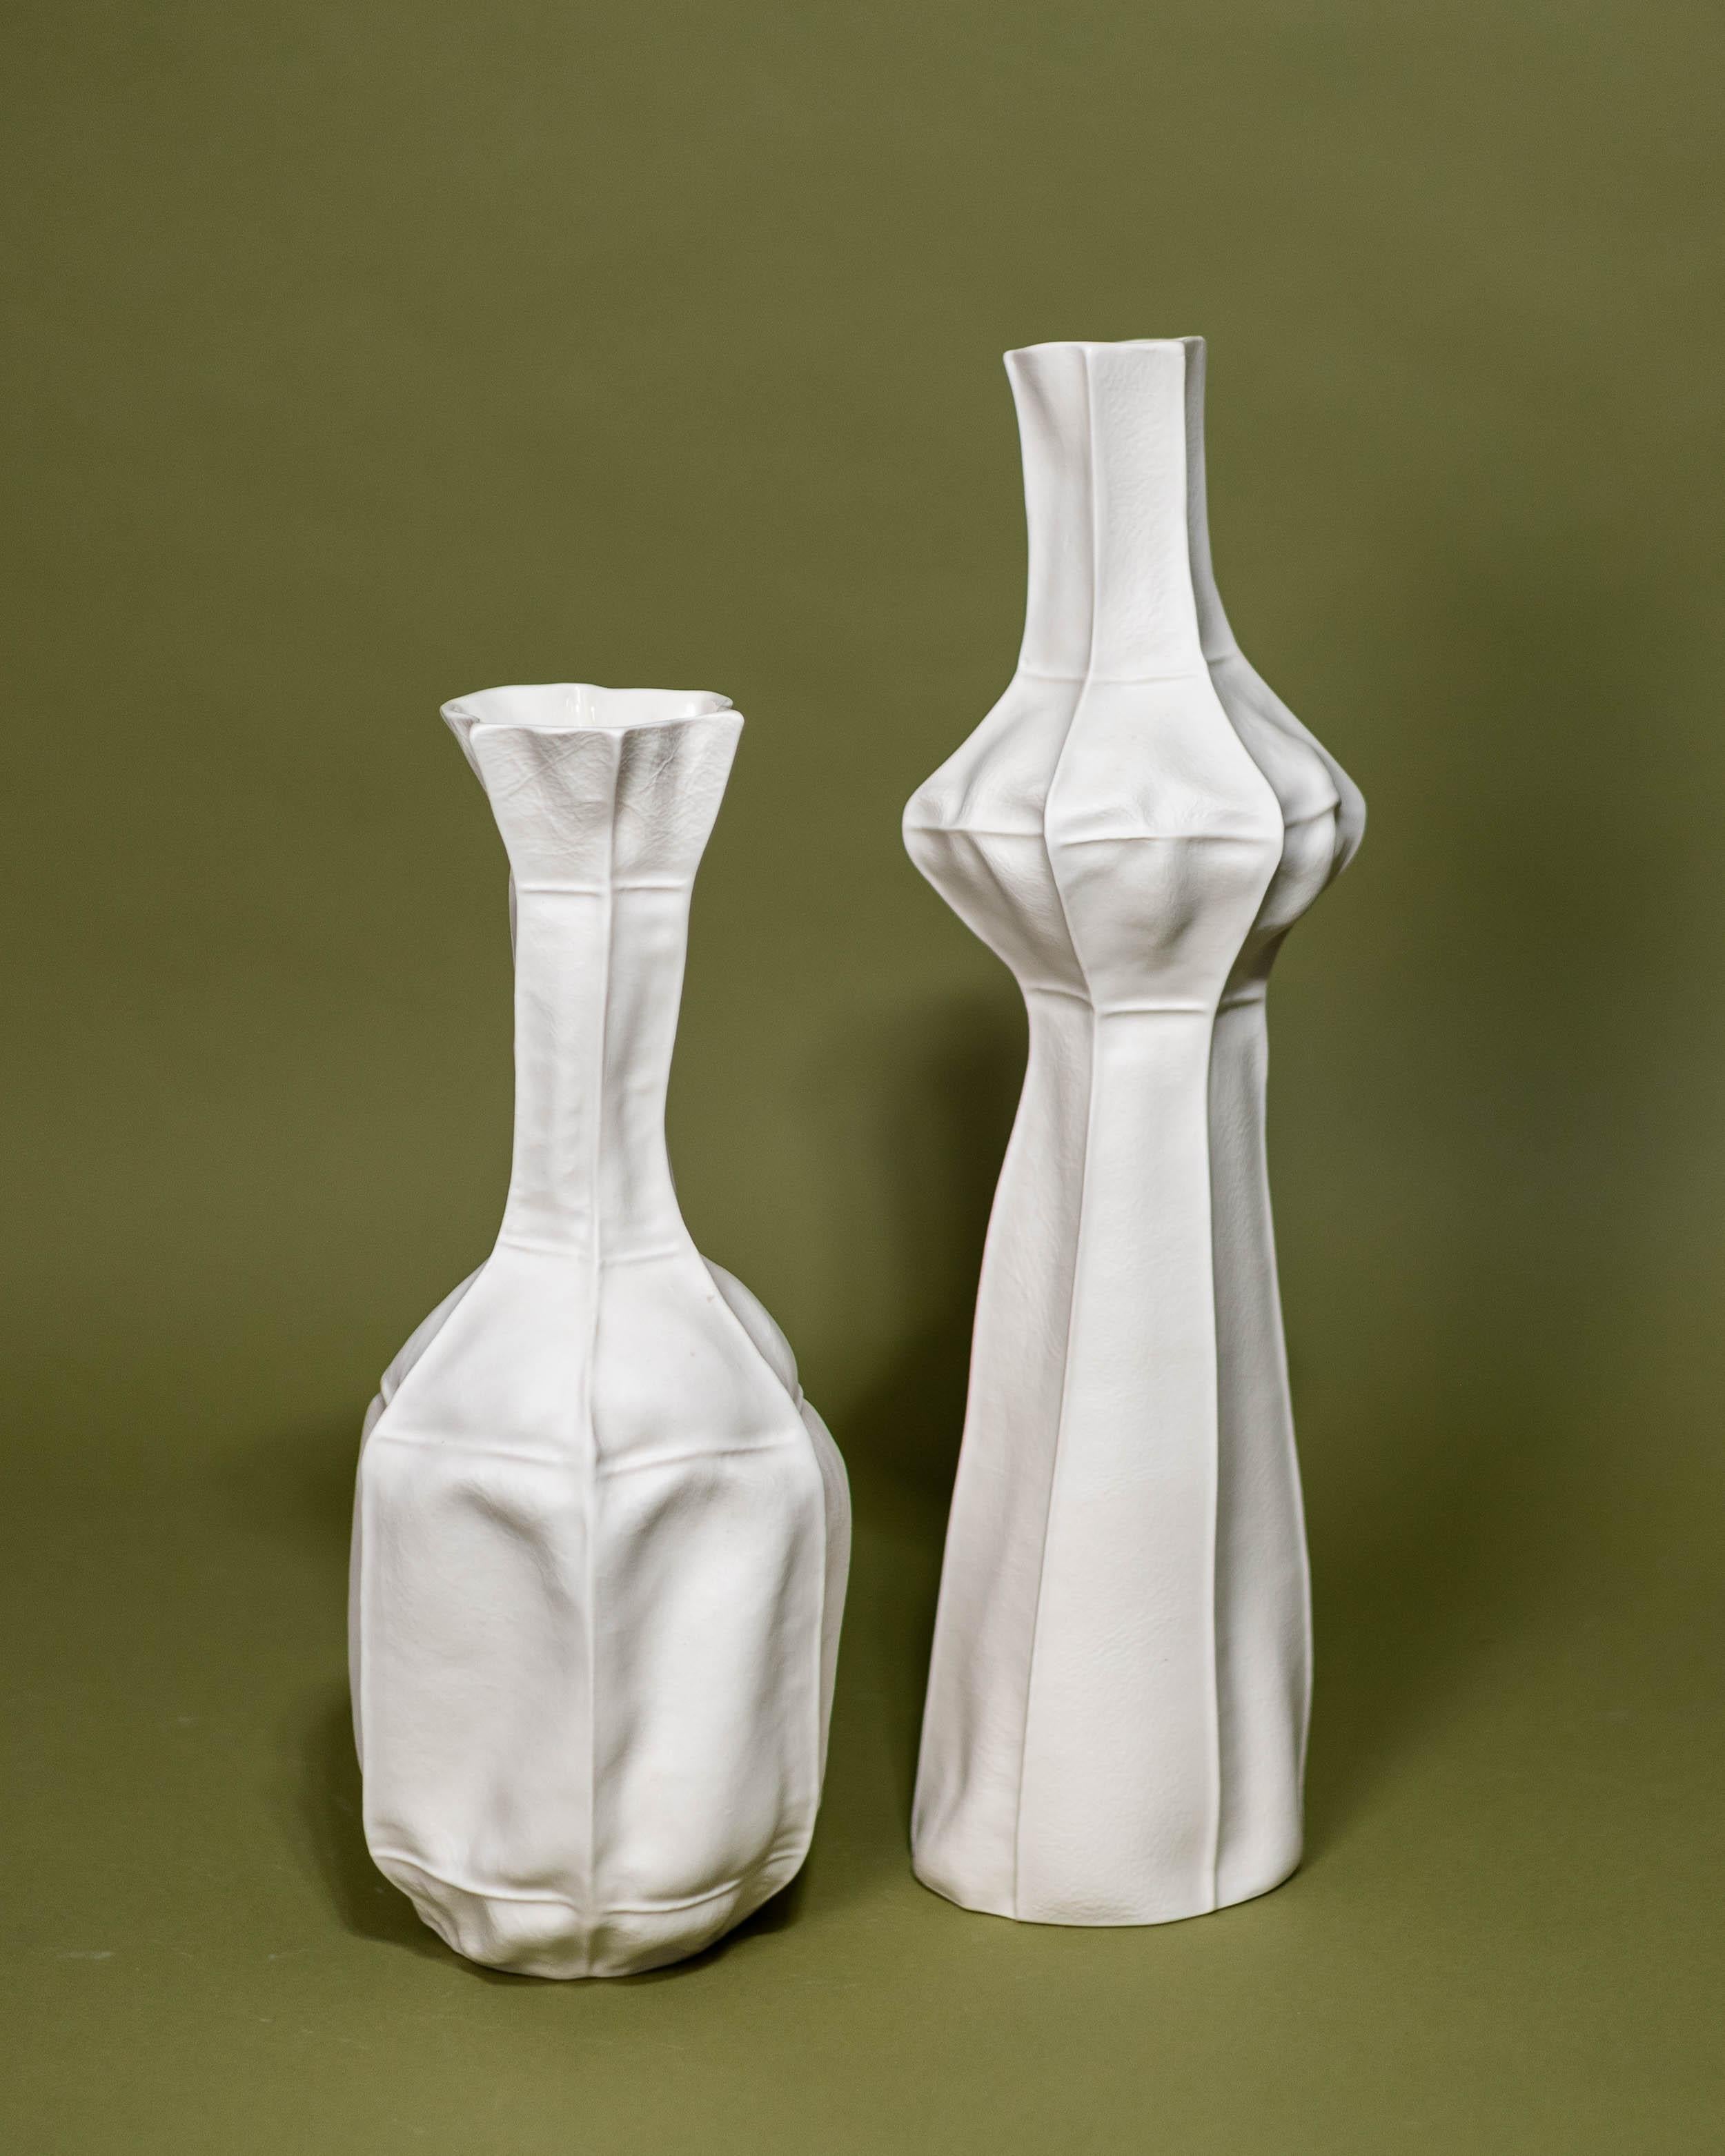 American Pair of Sculptural White Ceramic Kawa Vases, by Luft Tanaka, organic, porcelain For Sale